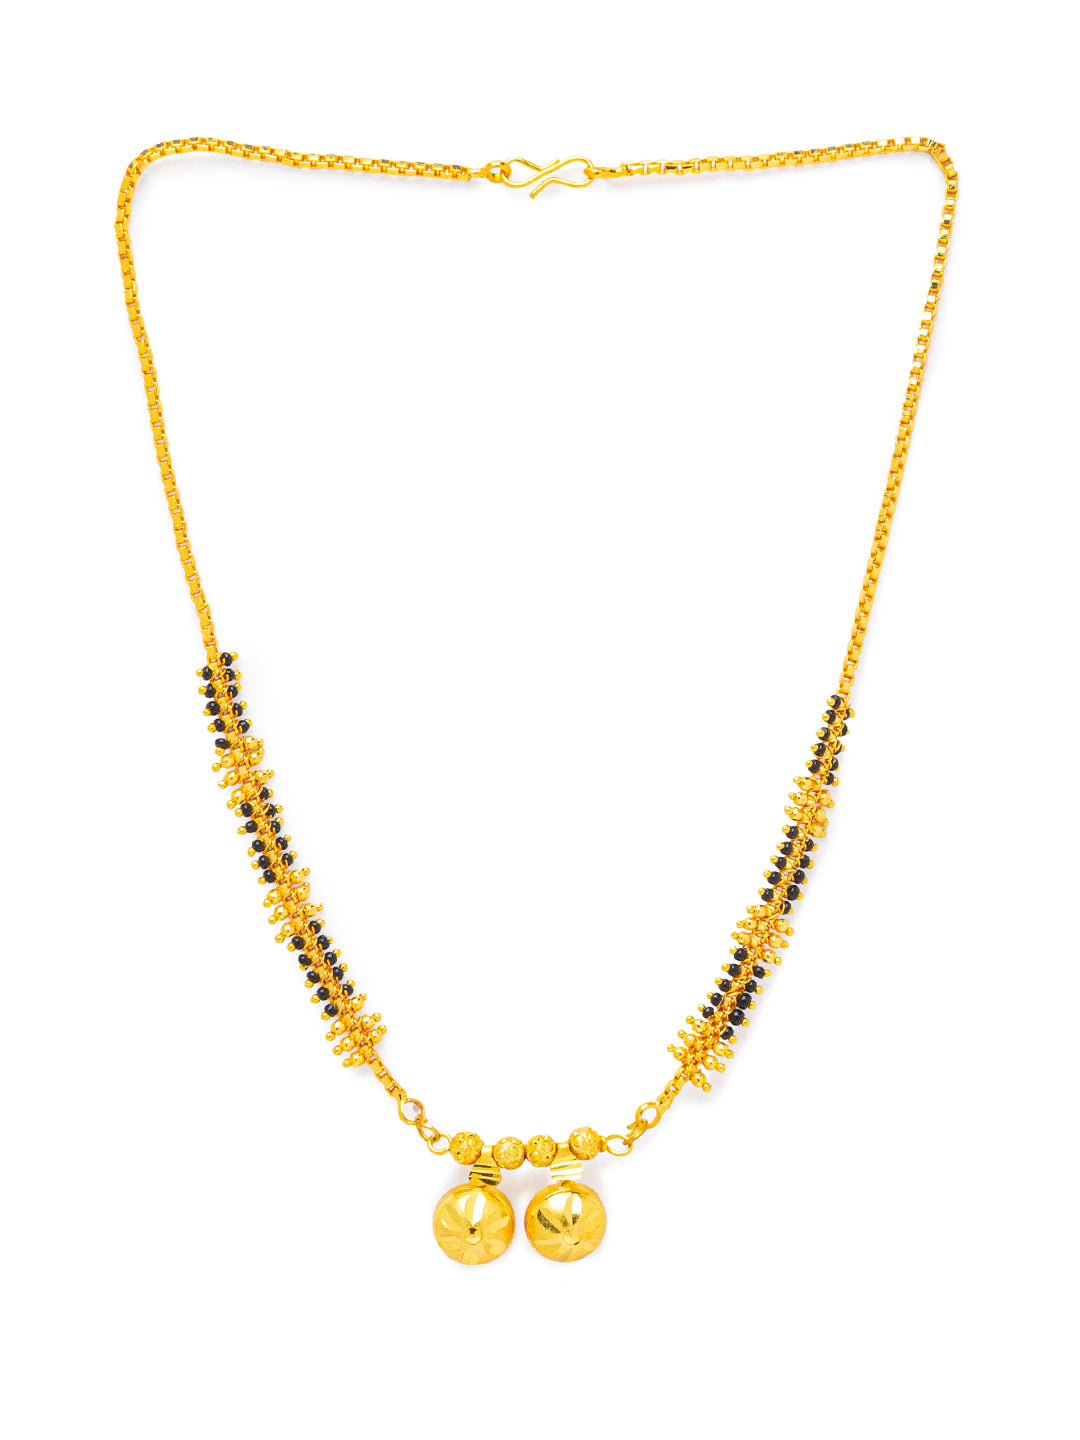 Combo Set of 2 Gold Plated Short Mangalsutra Designs and Long Mangalsutra Designs Ball Shape Pendant